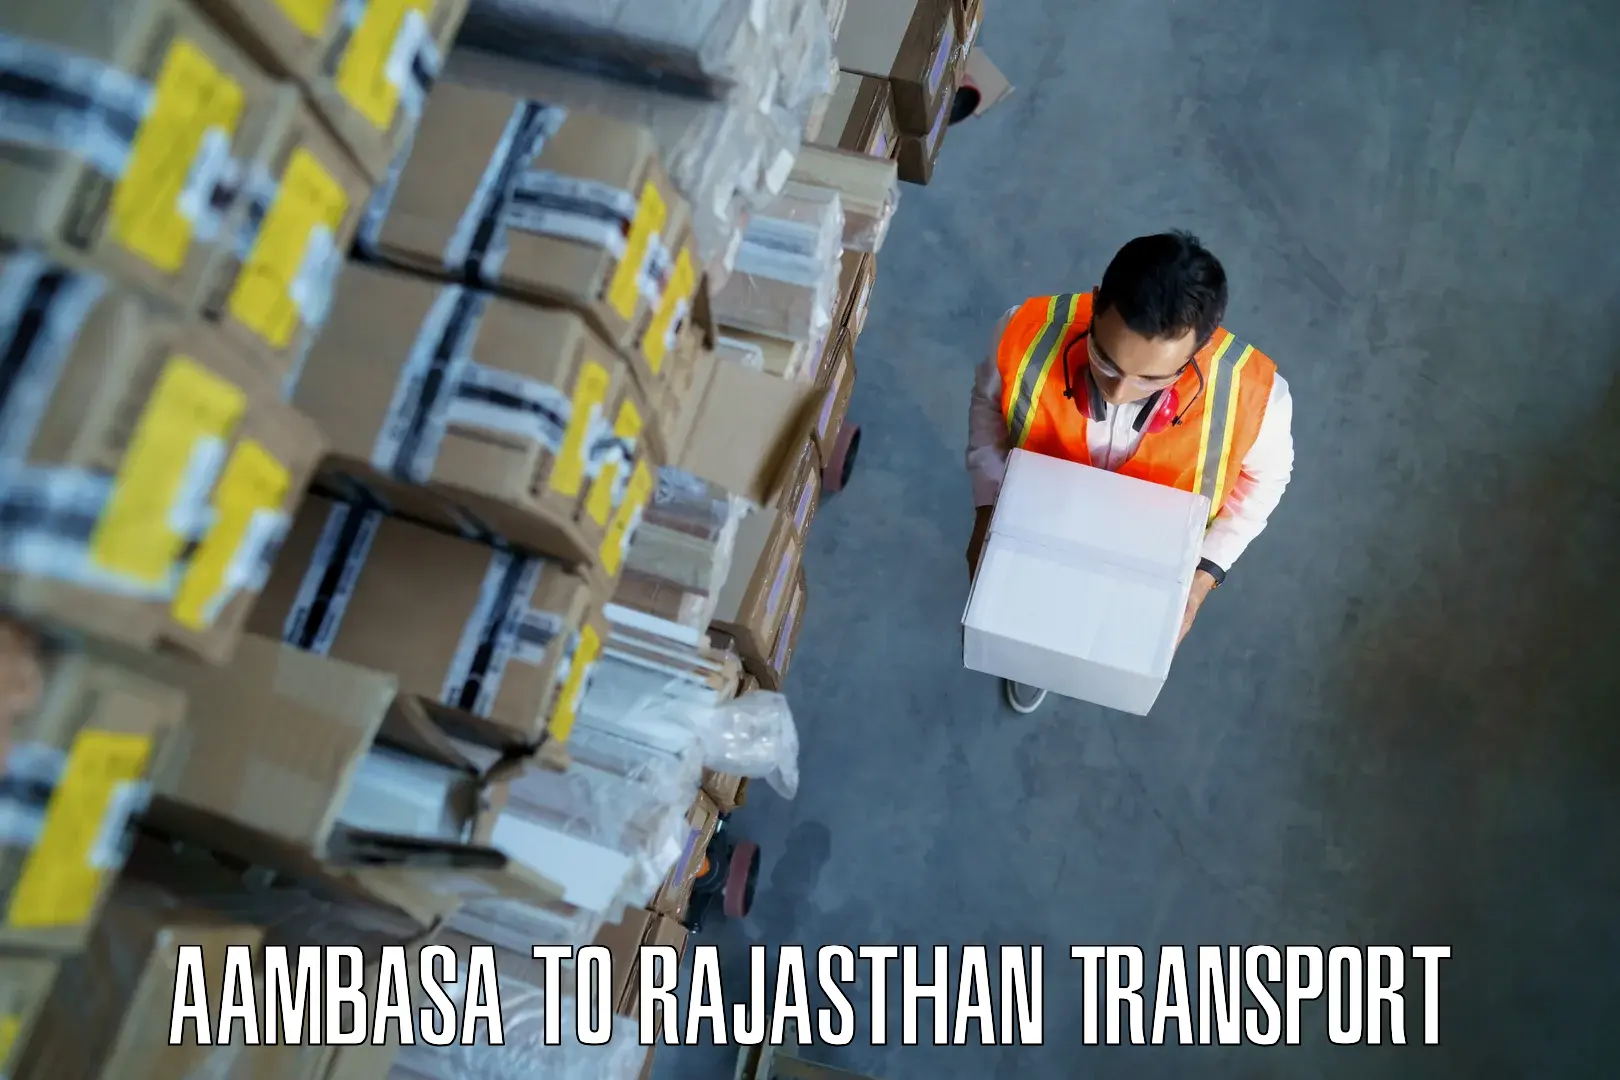 Nearby transport service Aambasa to Rajasthan